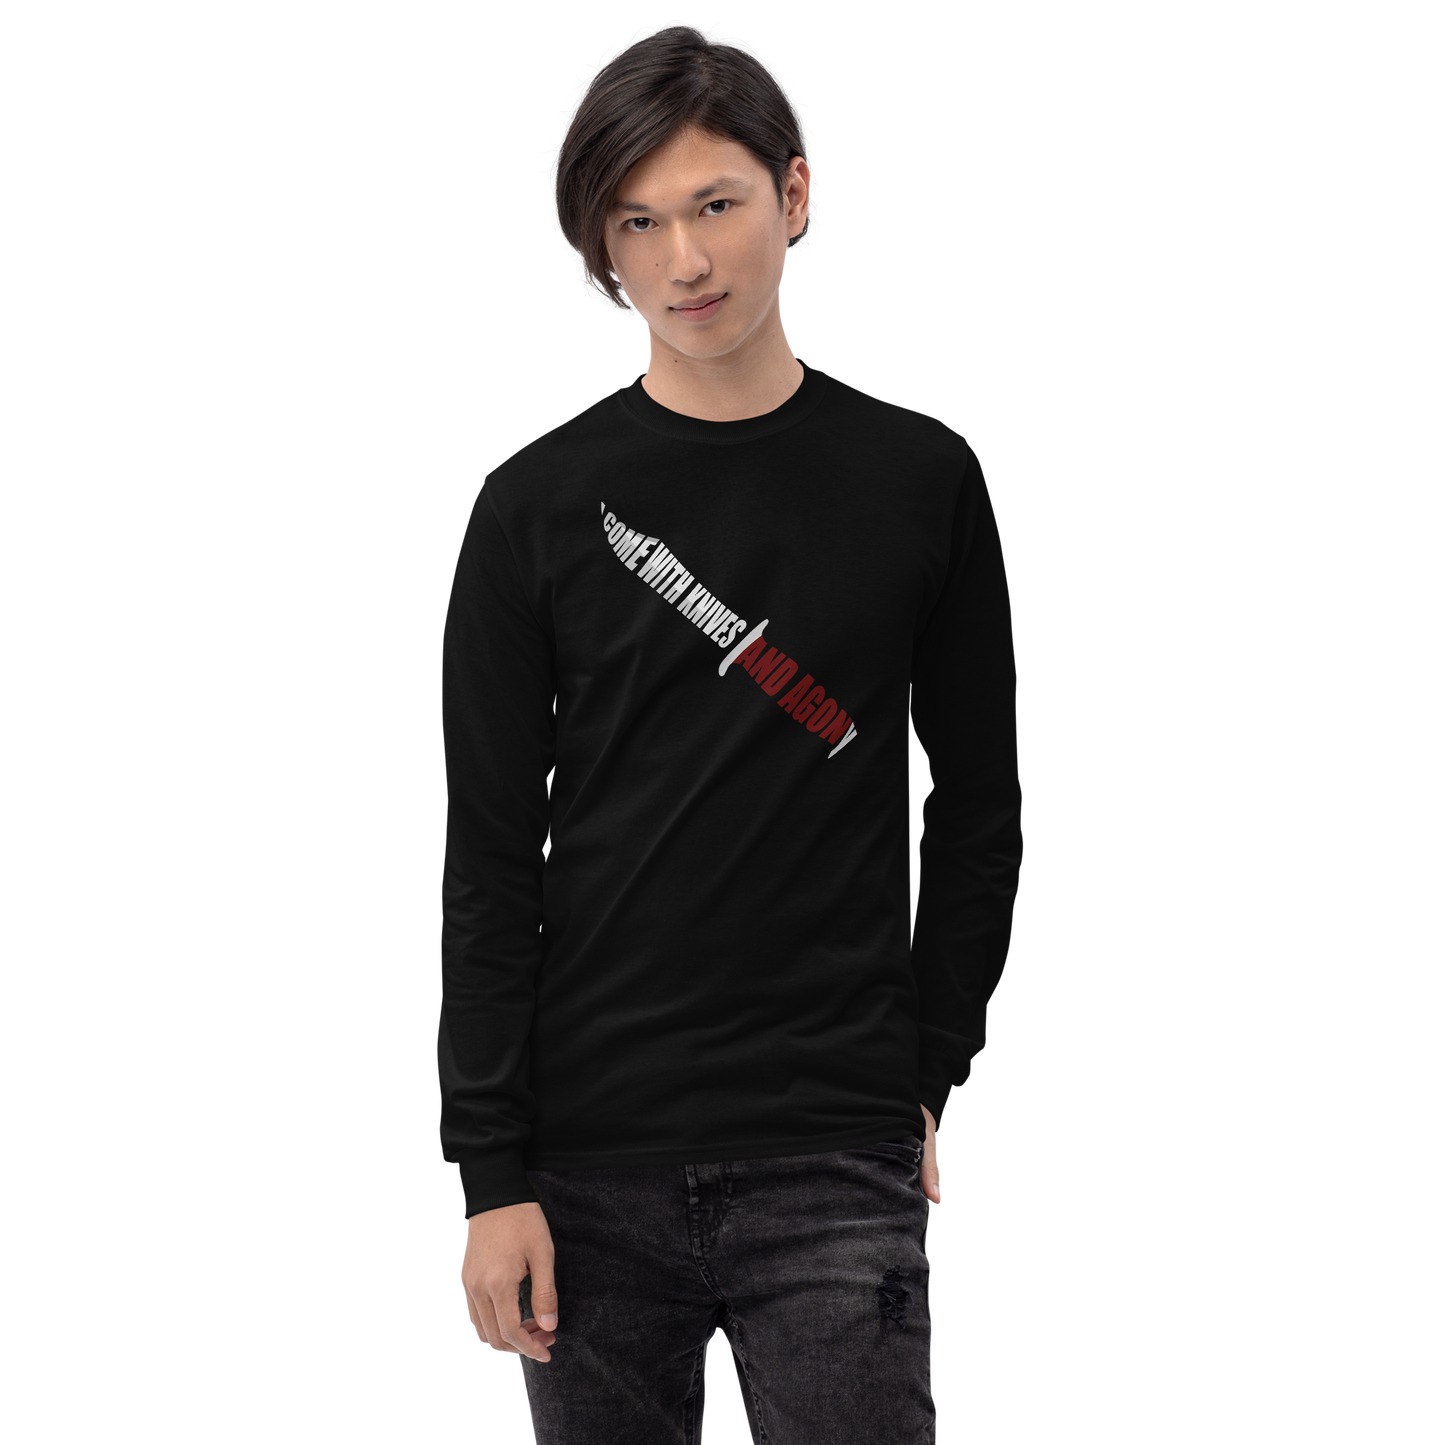 Long Sleeve Shirt Men’s - I Come With Knives